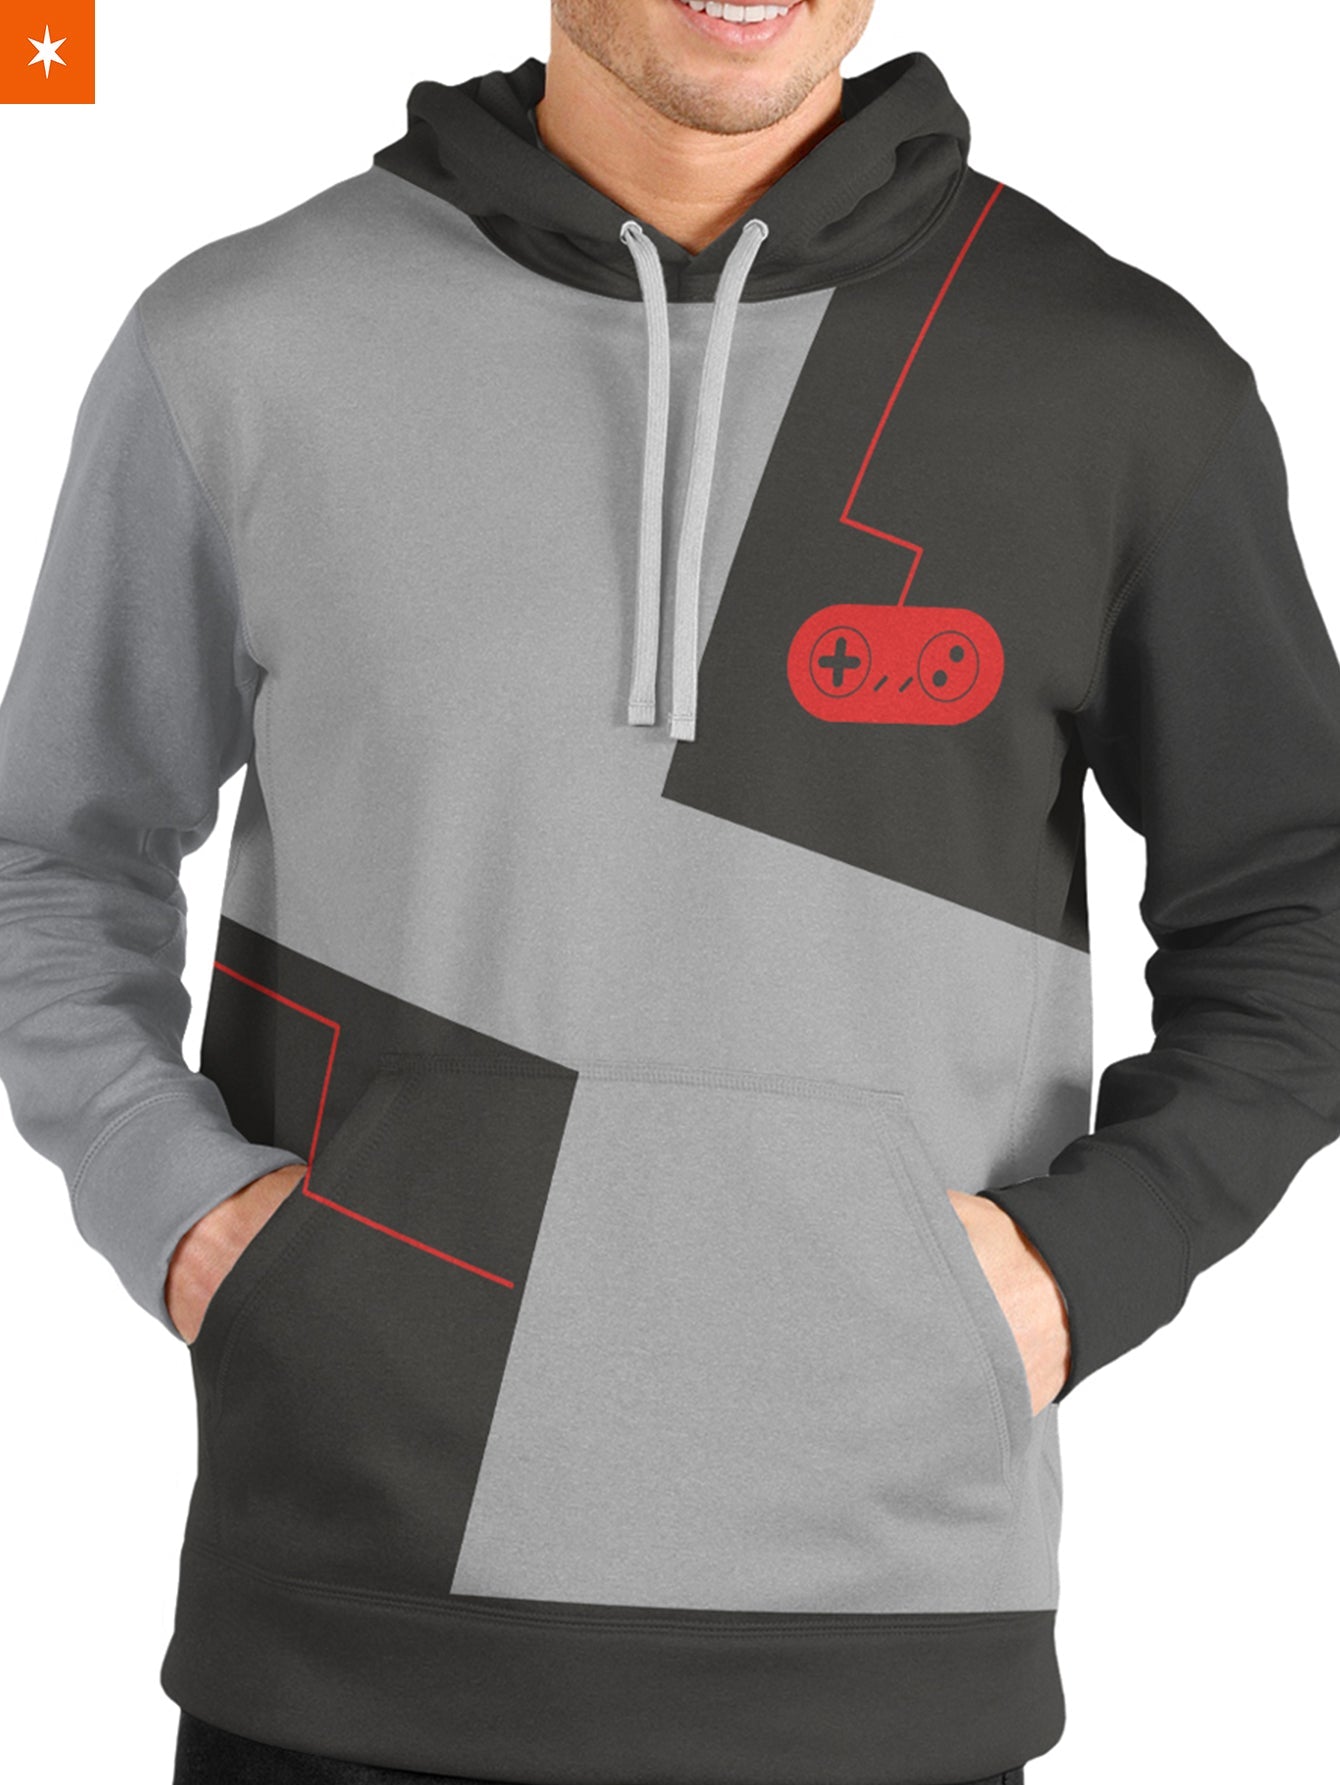 Fandomaniax - Gamer for Life Unisex Pullover Hoodie